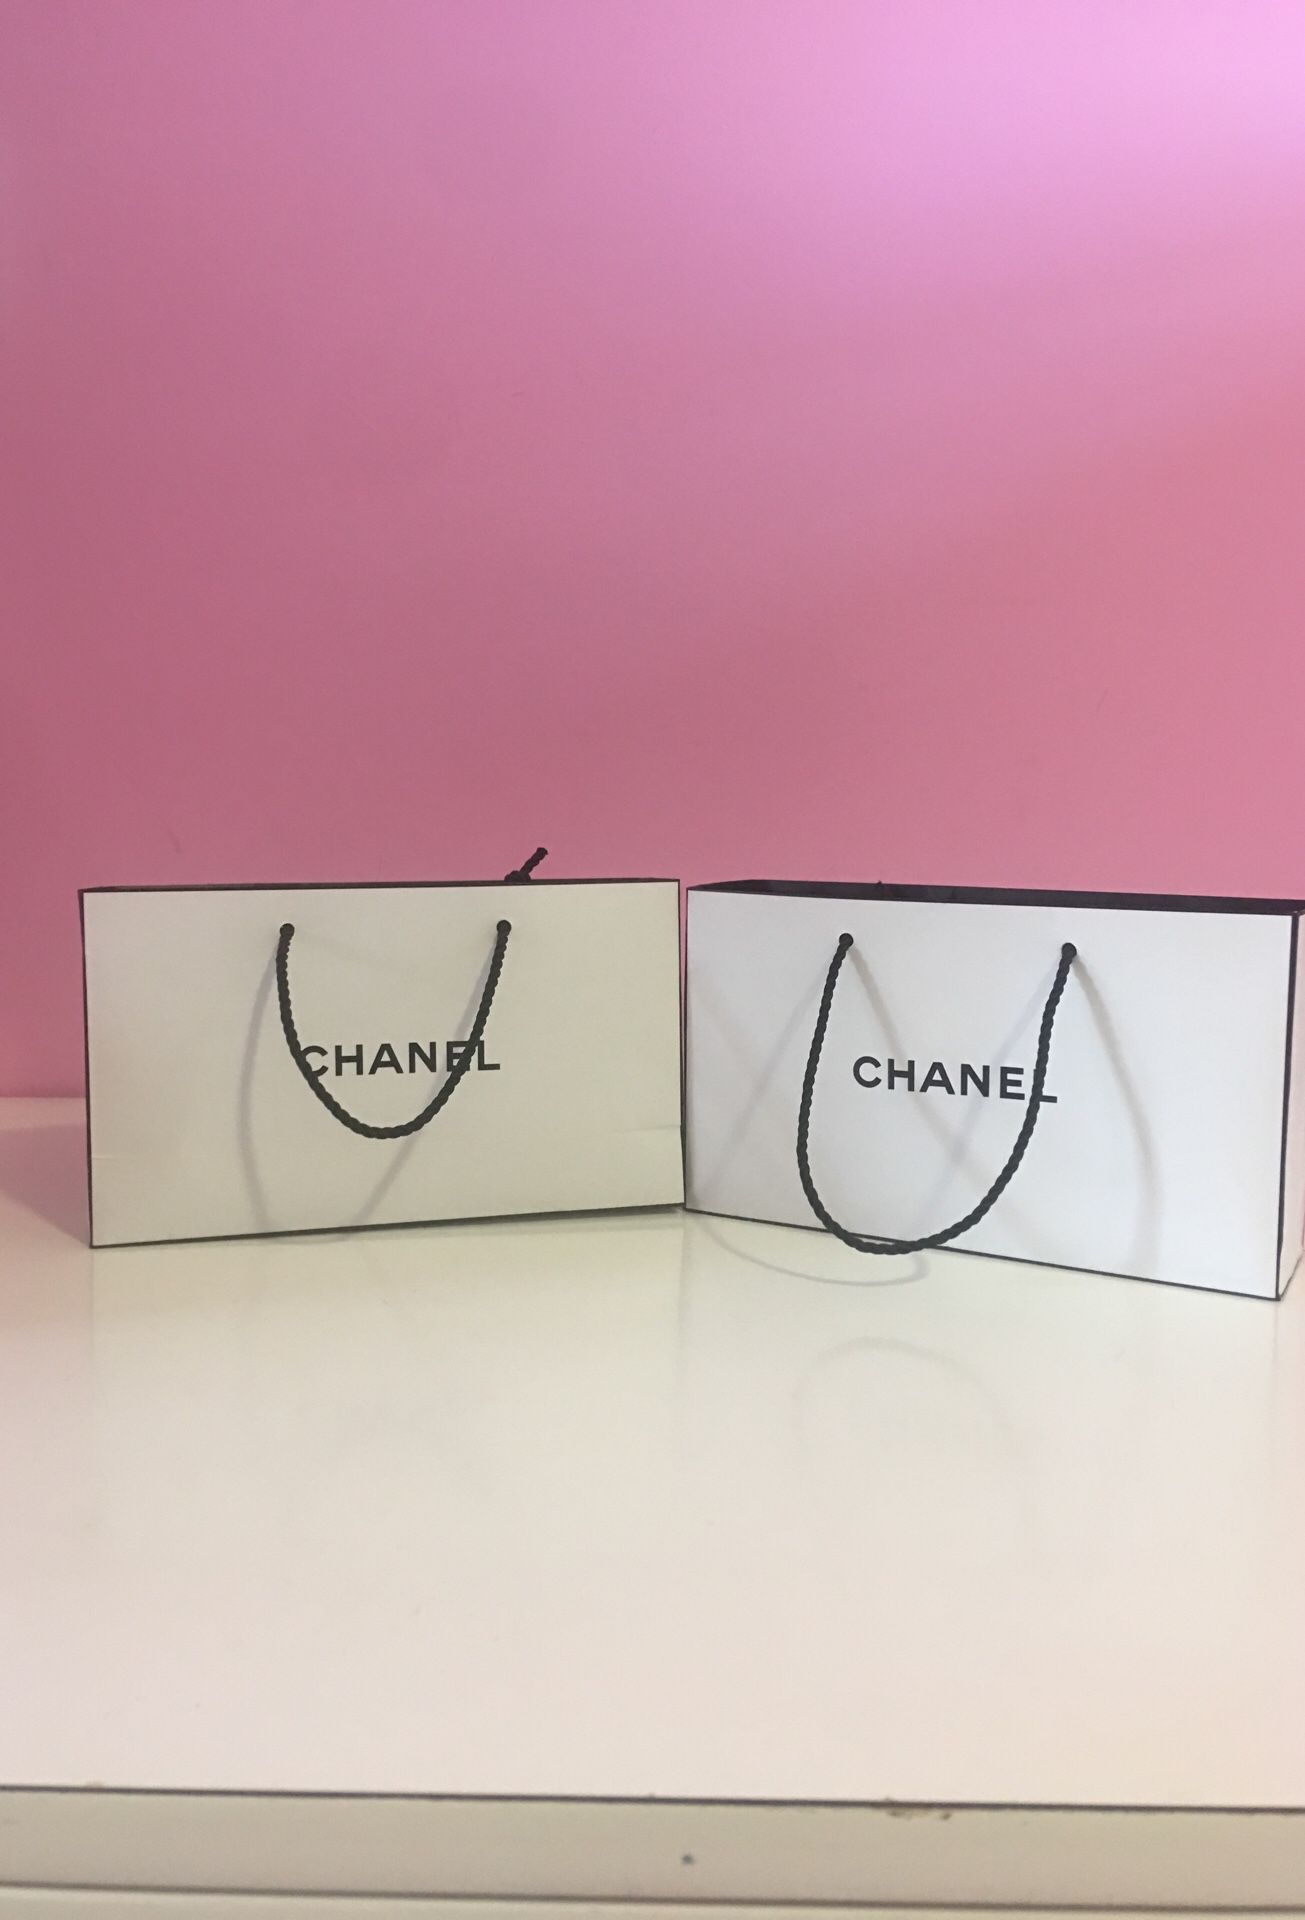 Chanel Lover’s Dream: A bag of brand new Chanel make-up and perfume and a second give-away bag of Chanel goodies